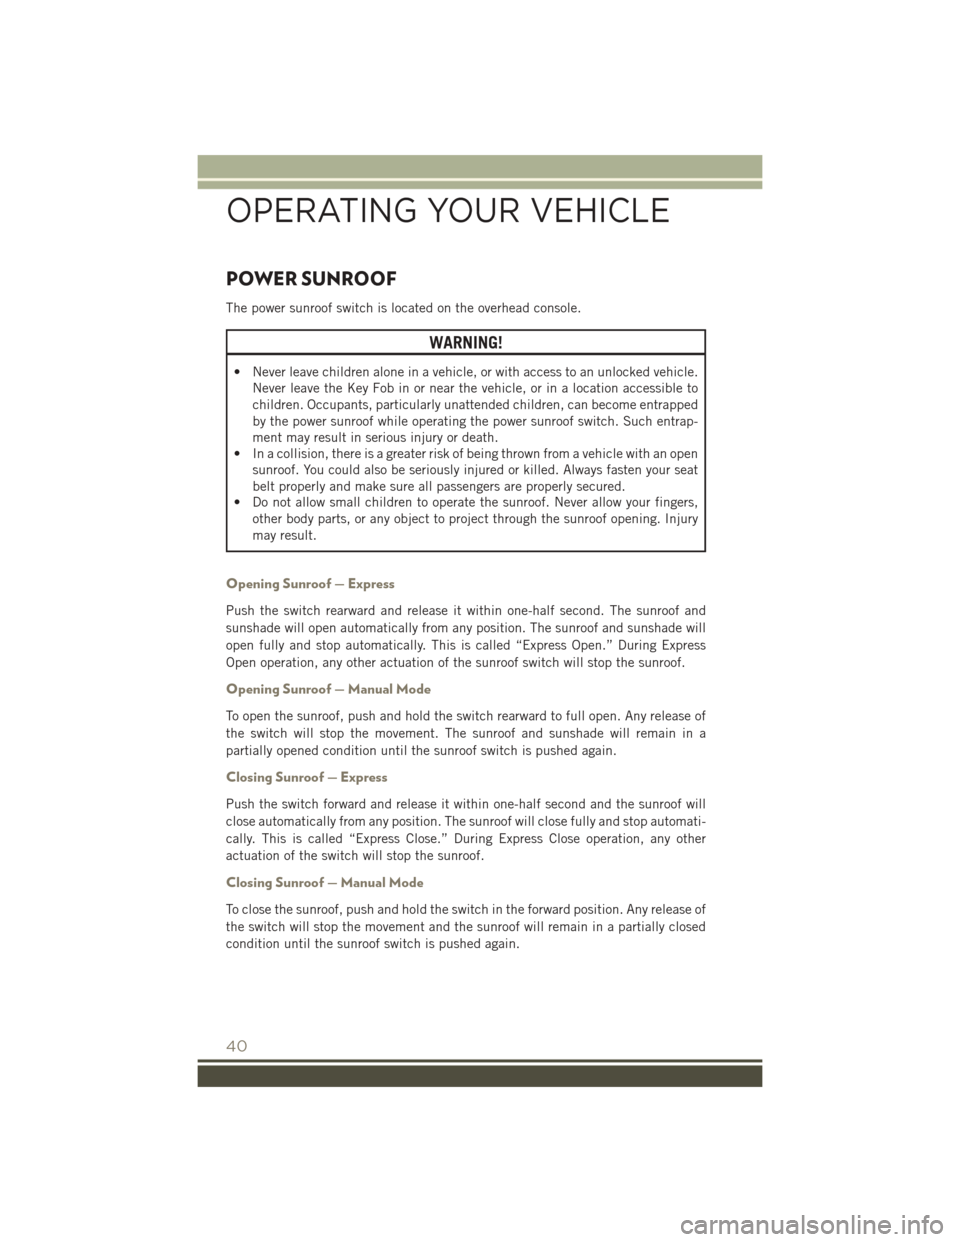 JEEP PATRIOT 2016 1.G User Guide POWER SUNROOF
The power sunroof switch is located on the overhead console.
WARNING!
• Never leave children alone in a vehicle, or with access to an unlocked vehicle.Never leave the Key Fob in or nea